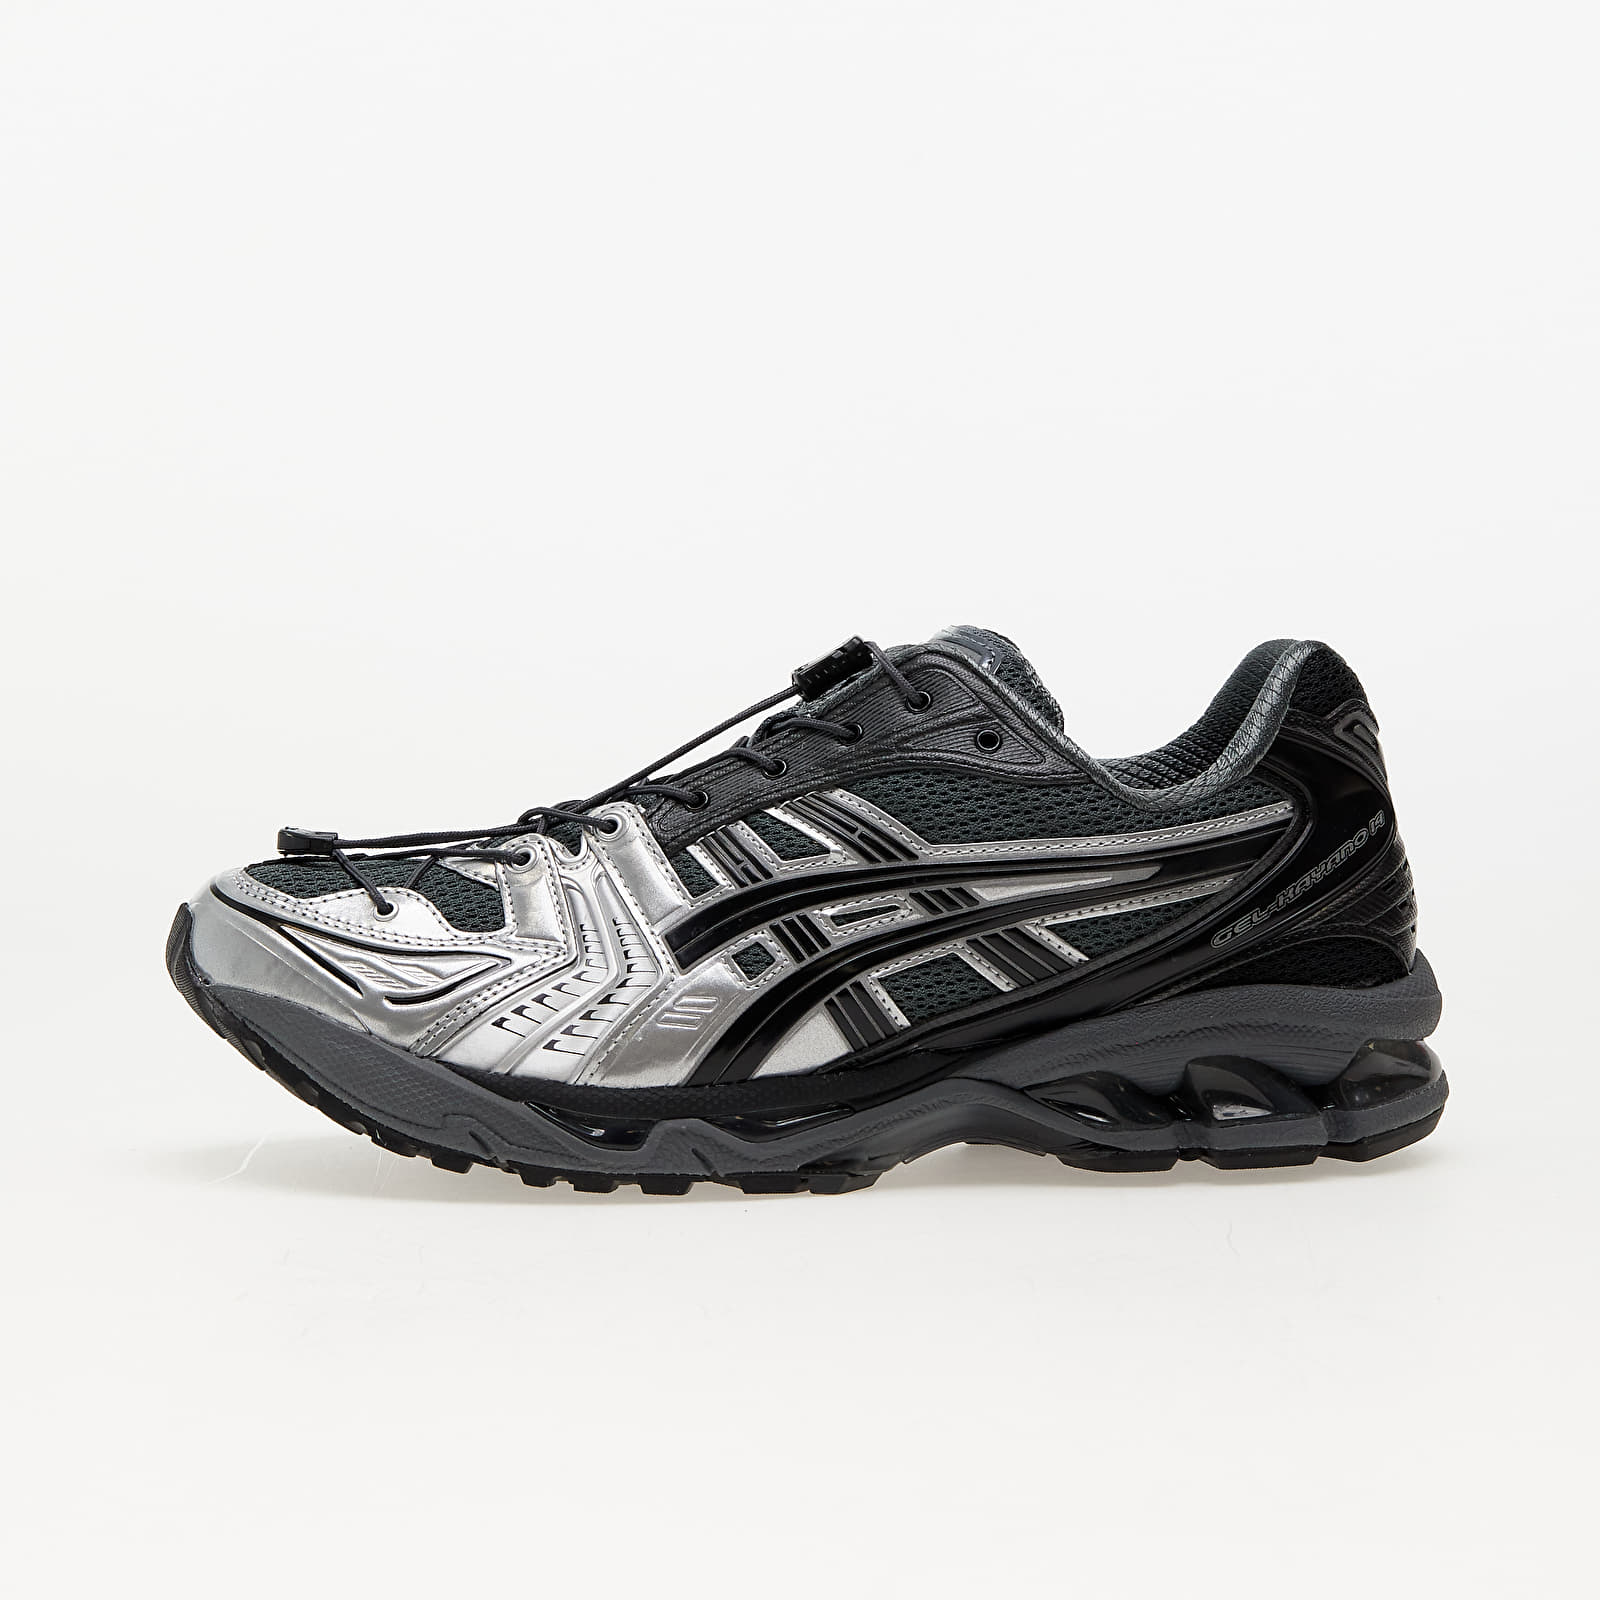 Men's shoes Asics x Unaffected Gel-Kayano 14 Dark Shadow/ Pure Silver